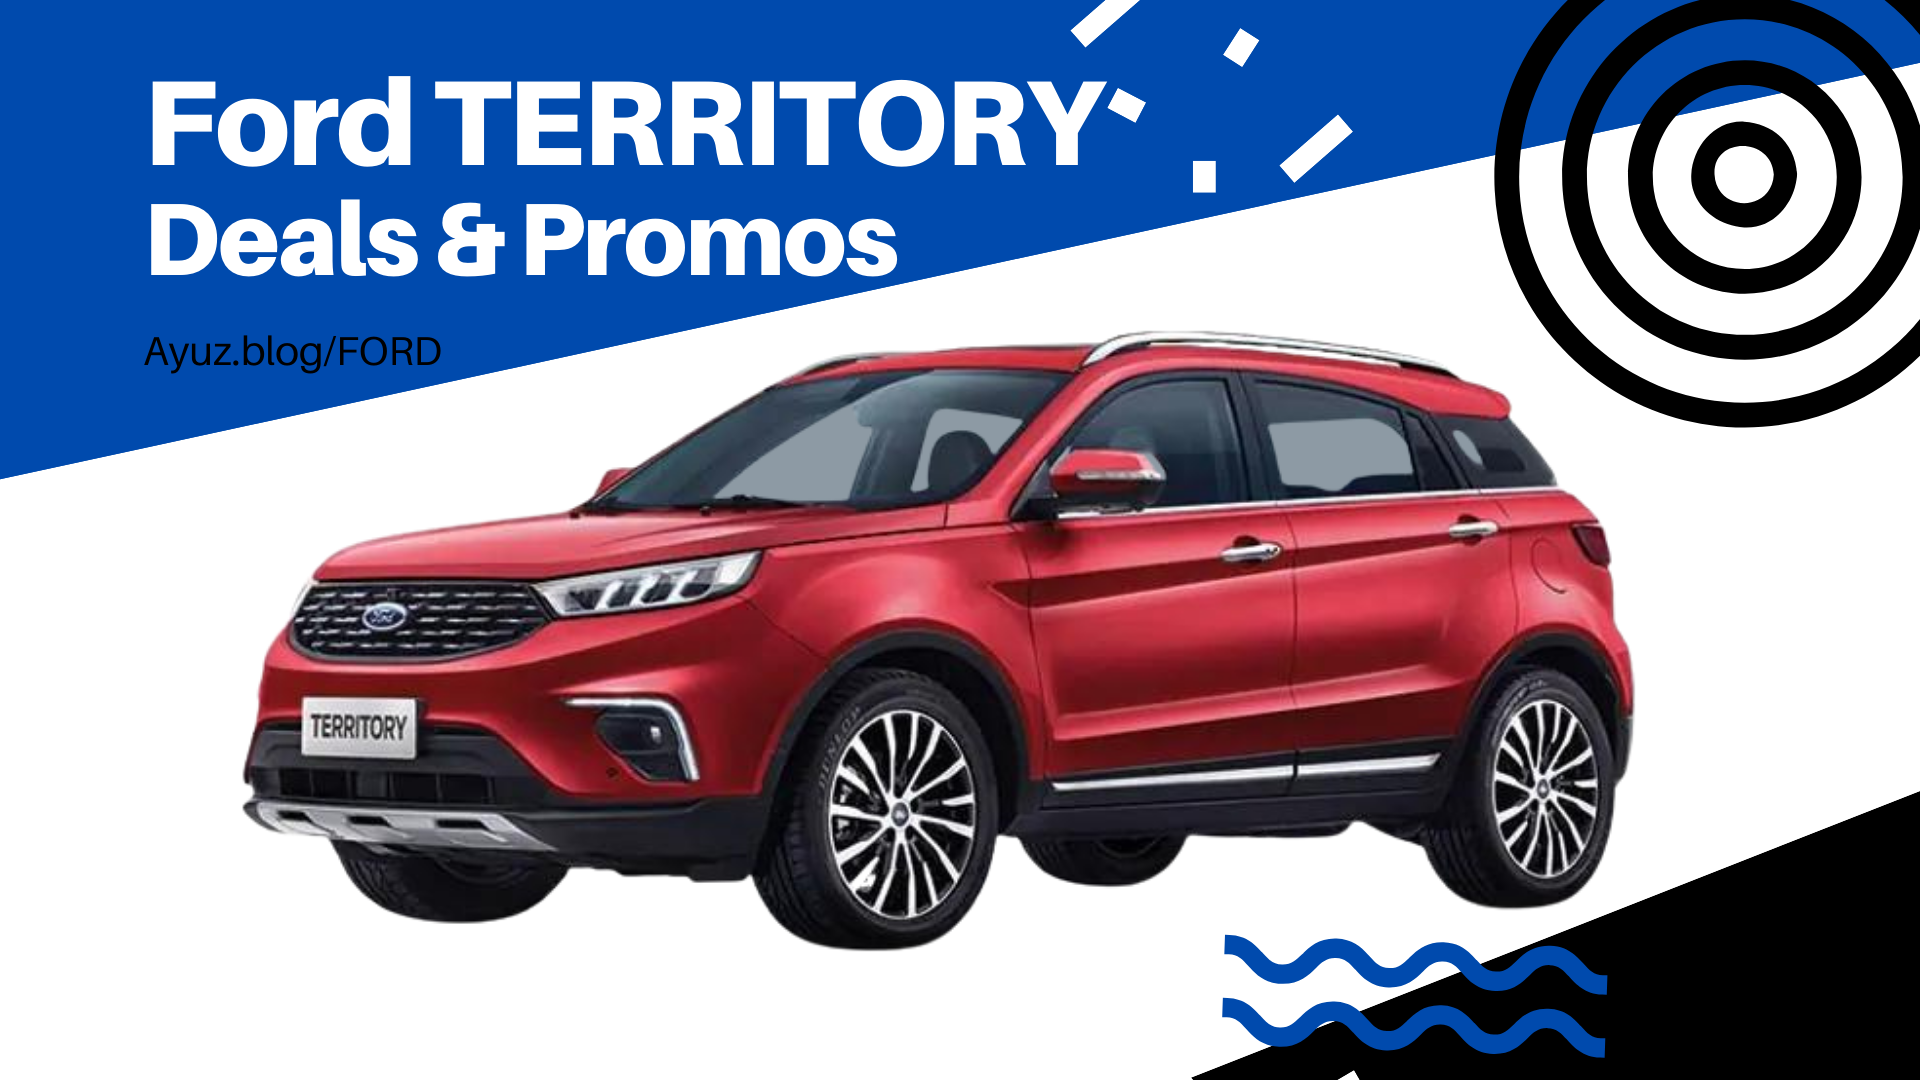 Ford TERRITORY Deals & Promos in Batangas, Philippines